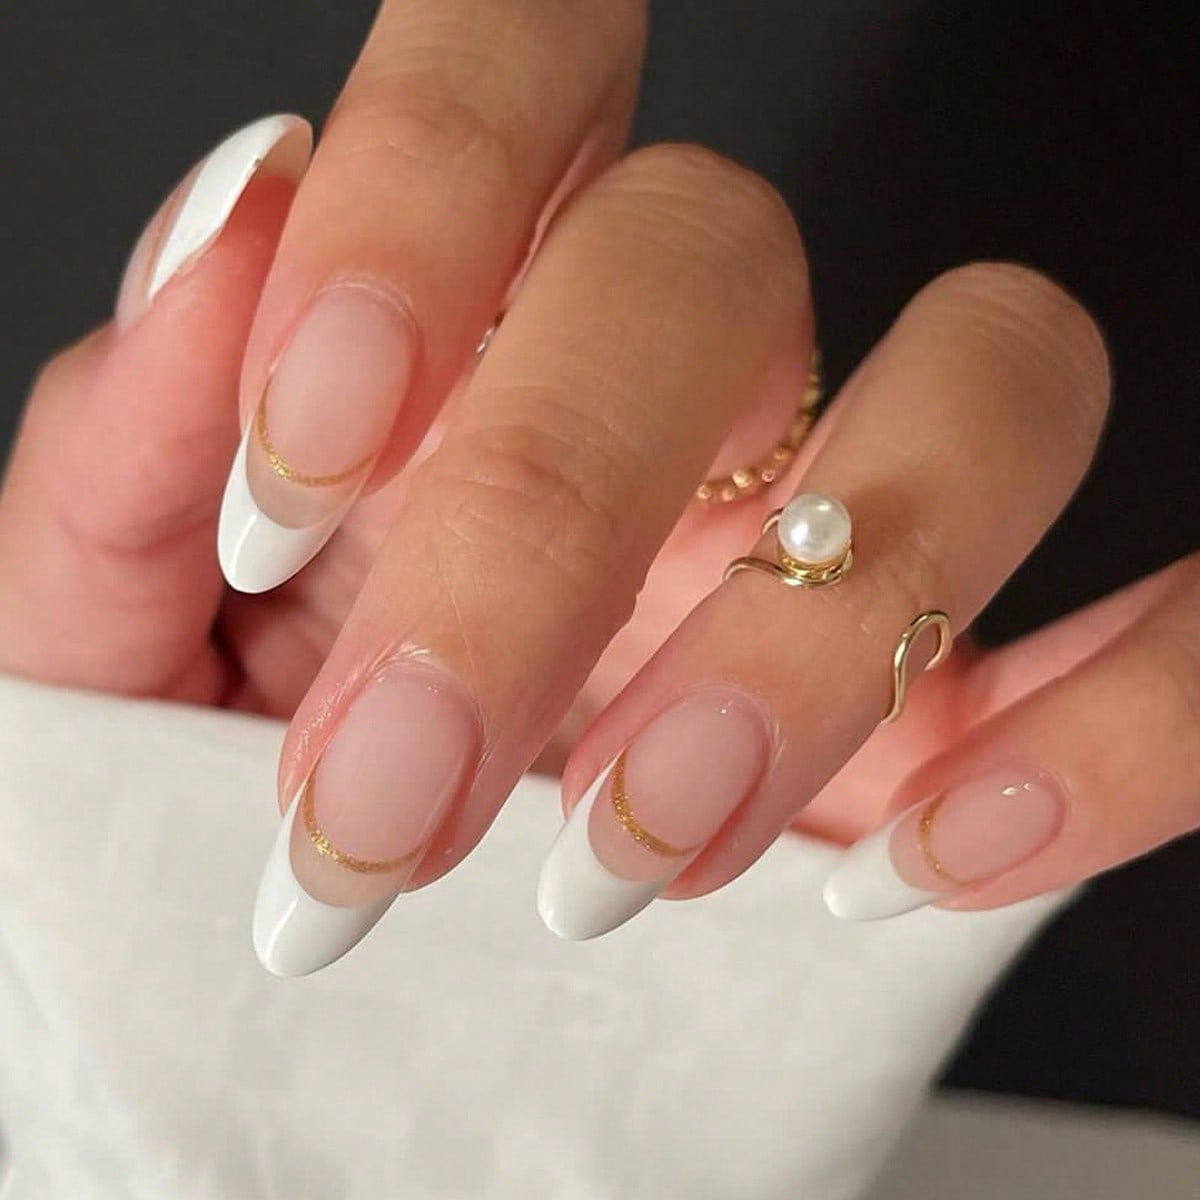 Gilded Grace Long Oval White Press On Nails with Gold Trim Accents